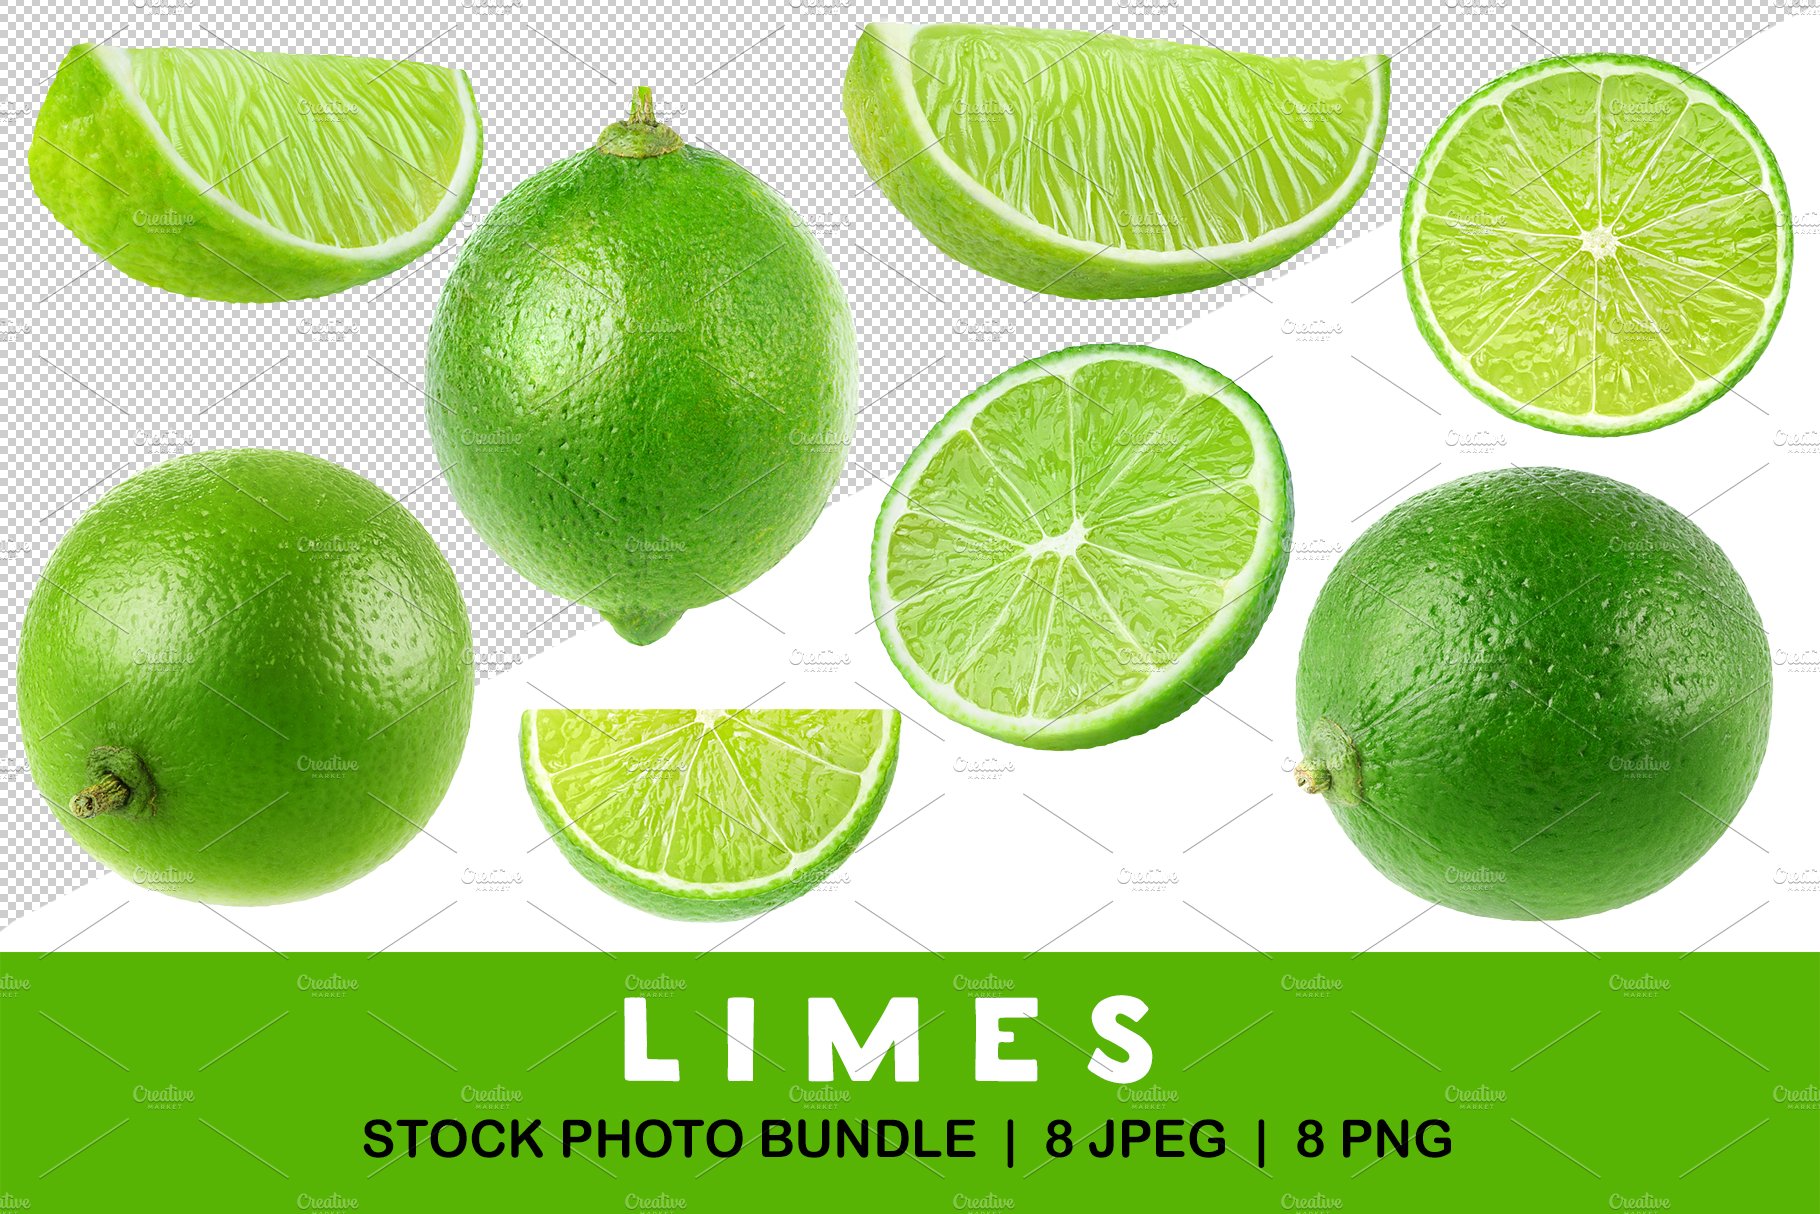 Limes collection cover image.